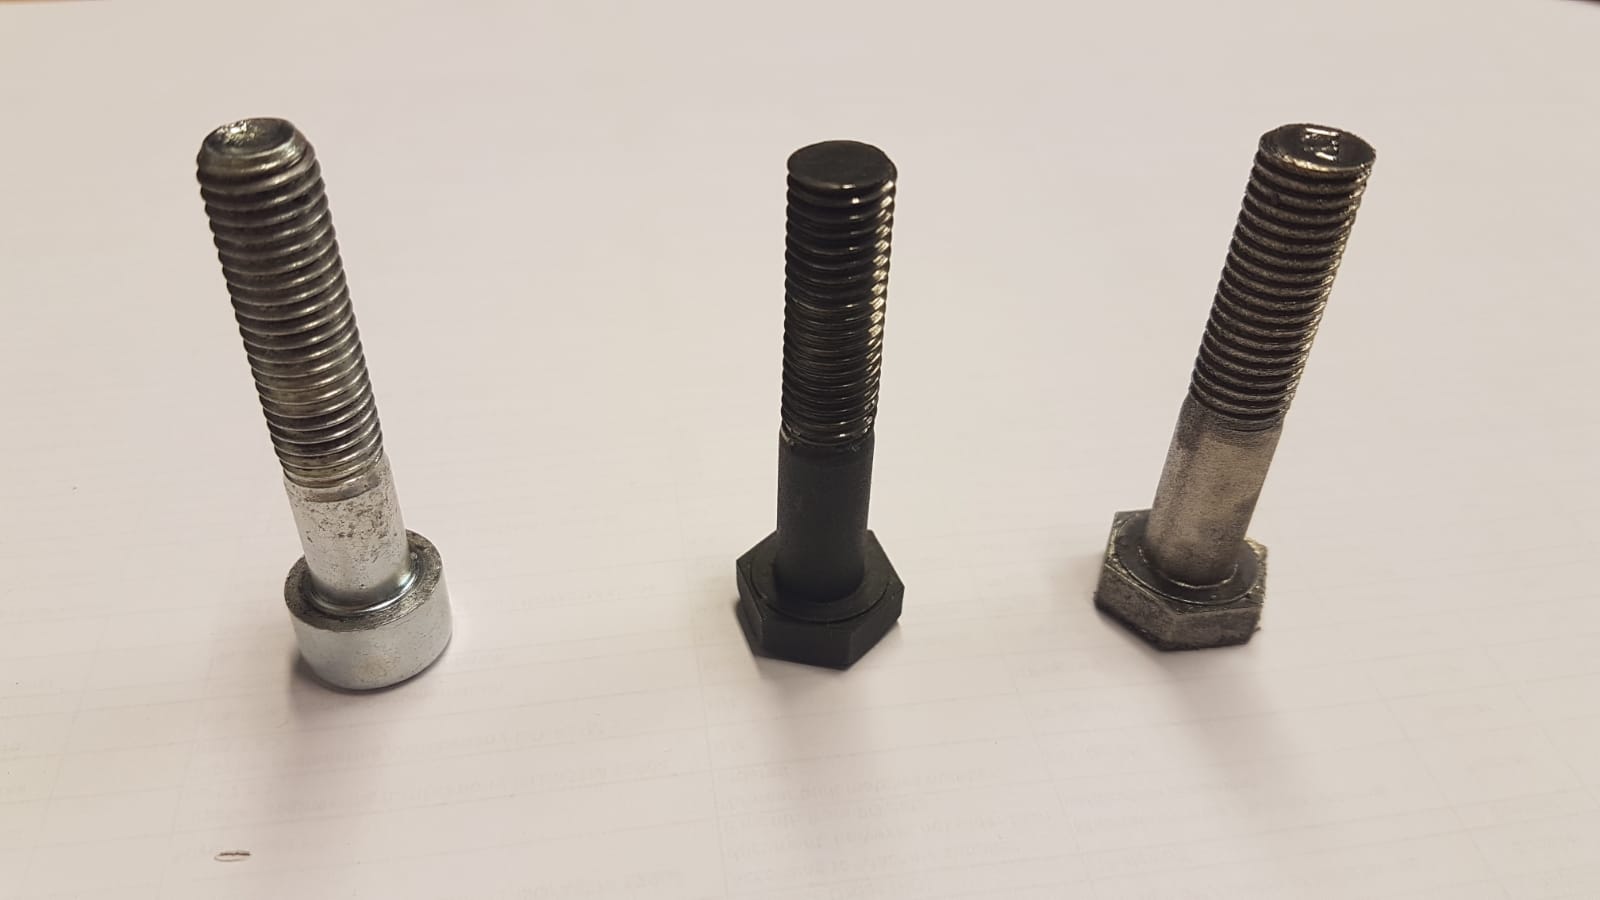 3D printed Inconel bolts